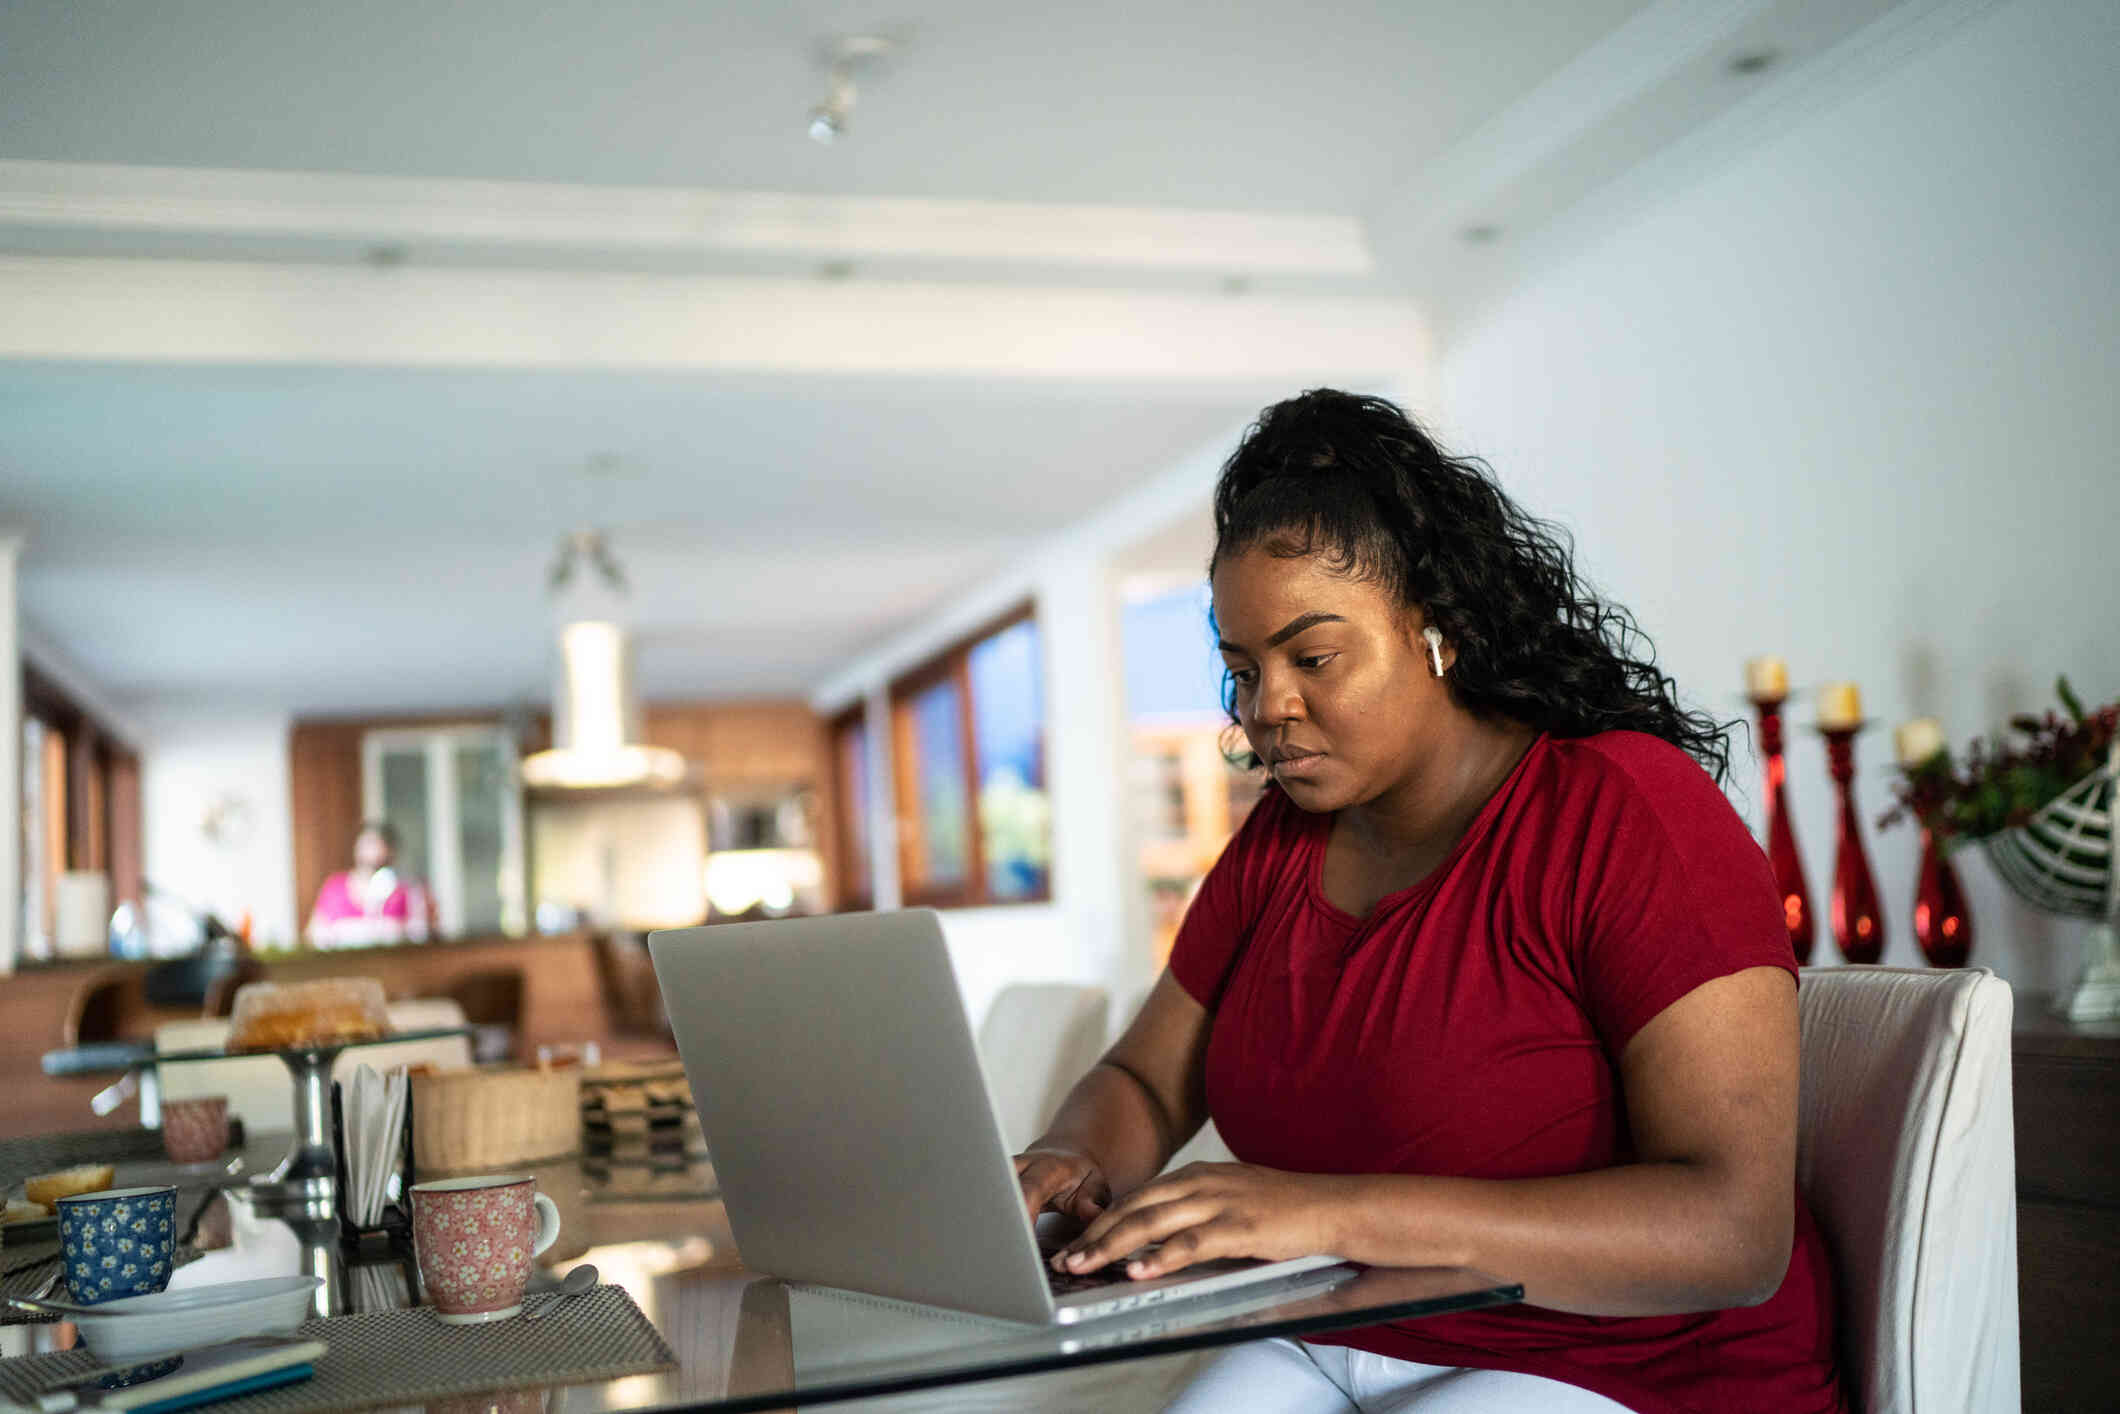 A woman in a red shirt with earpods sits at the kitchen table and types on the laptop open infront of her with a serious expression.